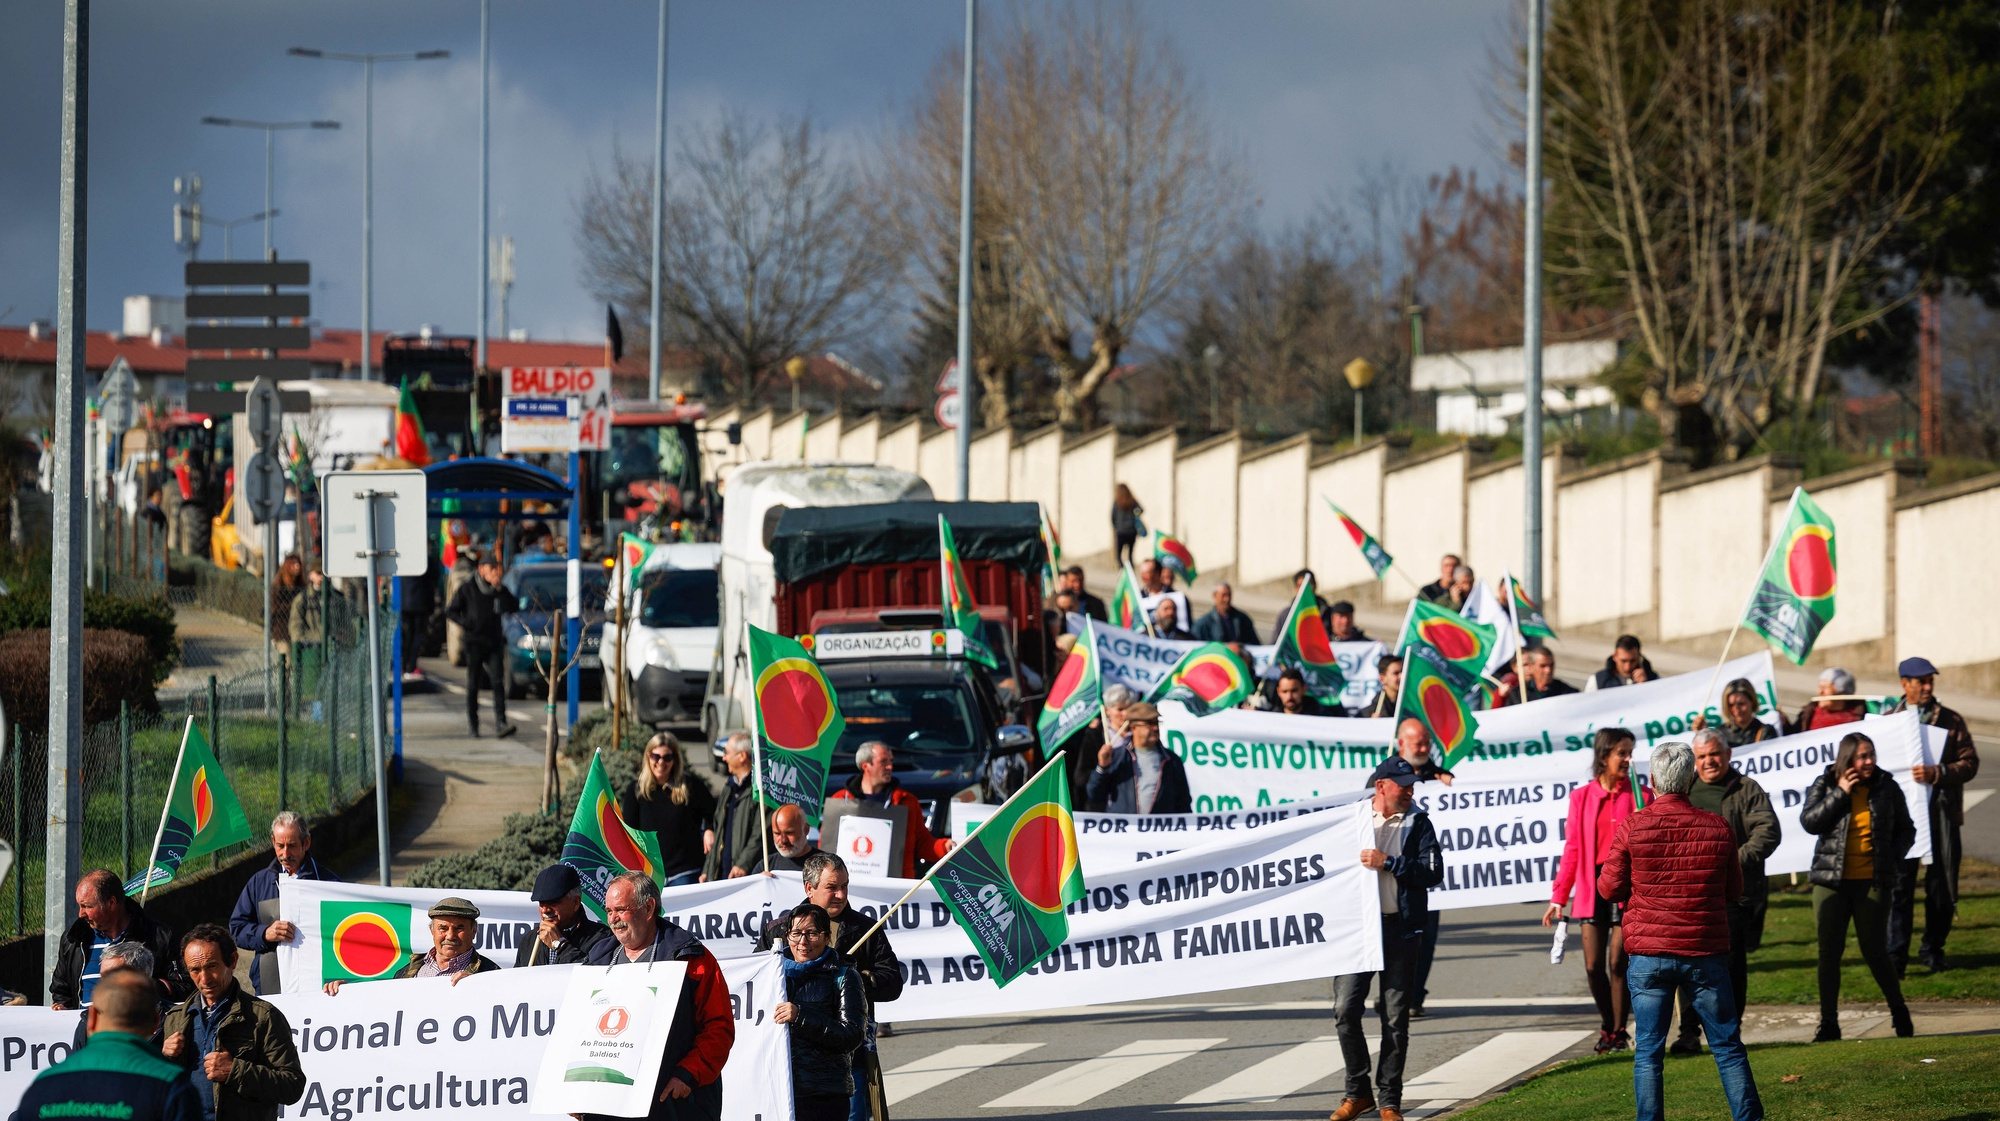 Farmers take part in a slow march promoted by the National Confederation of Agriculture (CNA), fighting for fair prices for production, in Vila Real, 07 February  2024. Farmers are uniting to demand better incomes and fair prices for production and to defend national production, family farming and the wasteland, and, at the end, they will vote on a list of complaints to hand into the sovereign bodies and political parties. PEDRO SARMENTO COSTA/LUSA